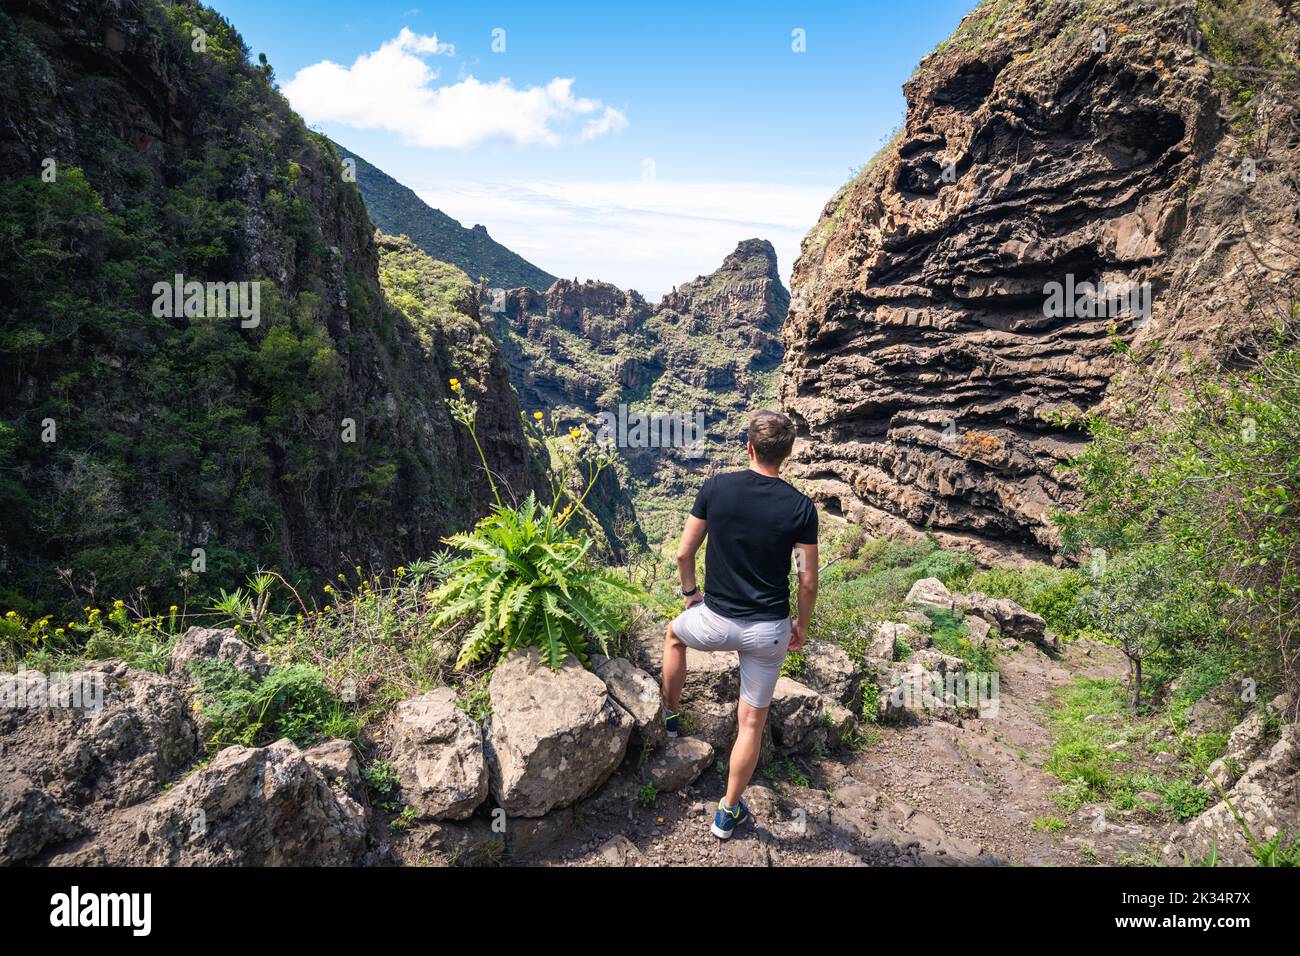 A Caucasian male enjoying his vacation in a rocky landscape with majestic sceneries Stock Photo